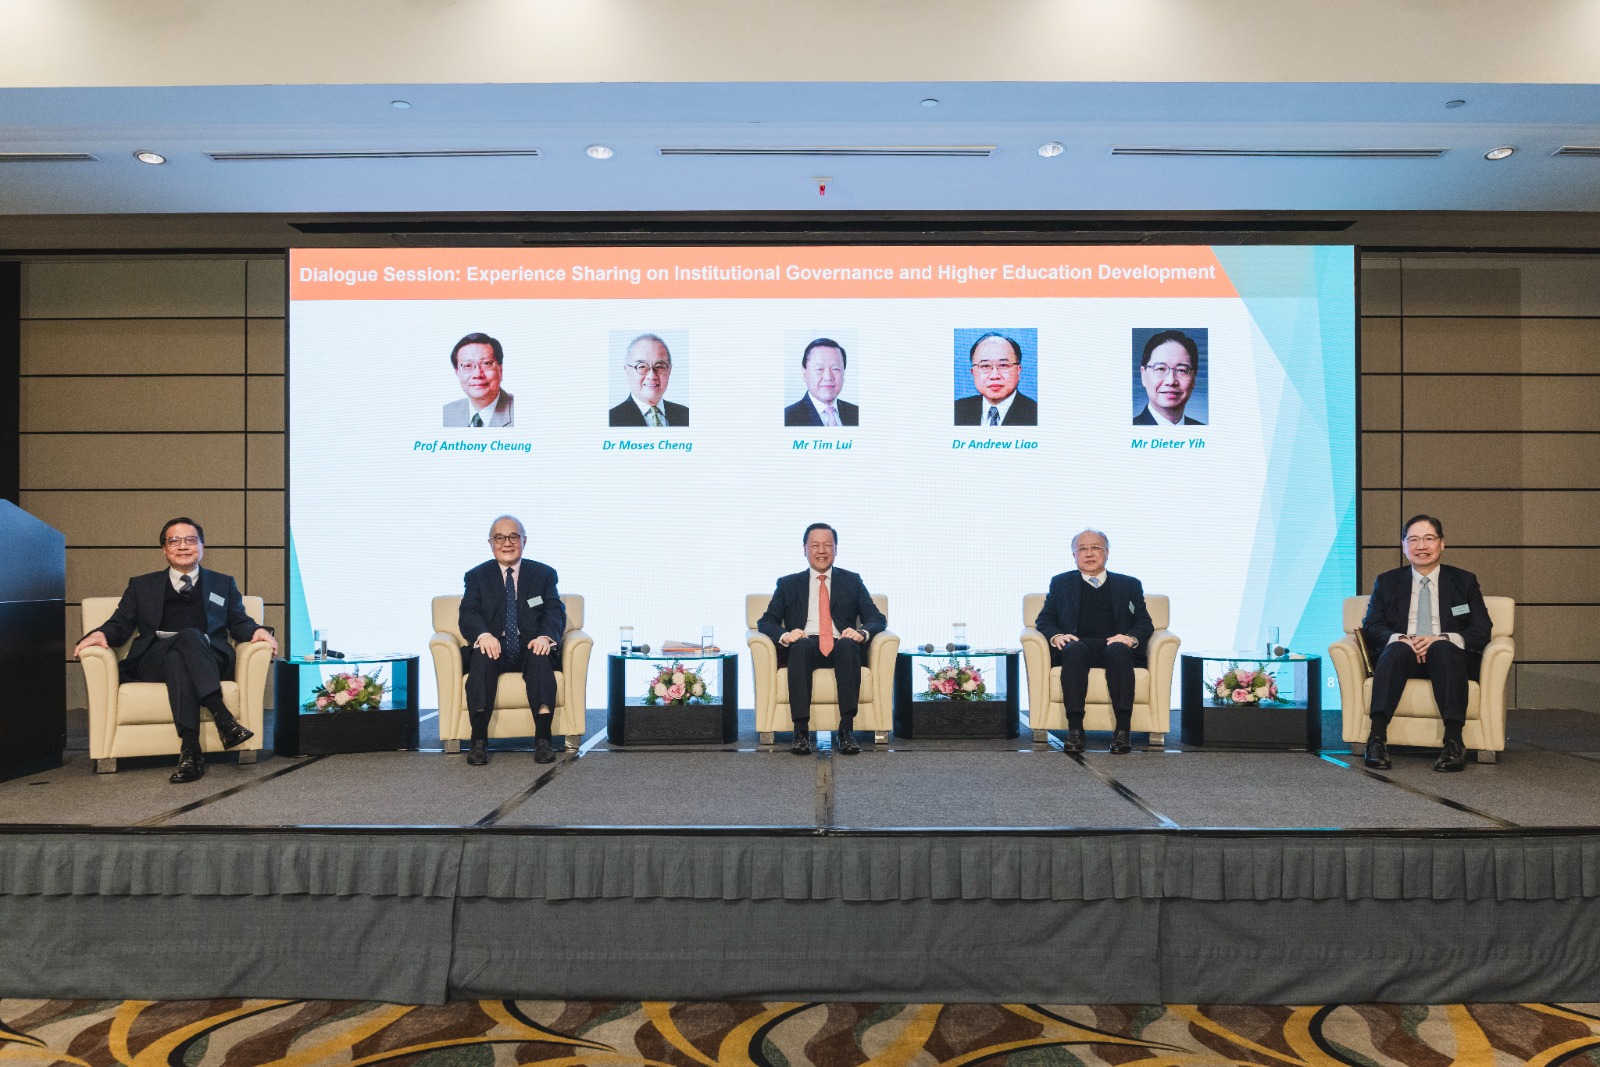 (Left to Right) Professor Anthony Cheung, Dr Moses
                          Cheng, Mr Tim Lui, Dr Andrew Liao, and Mr Dieter Yih
                          participate in the panel discussion.